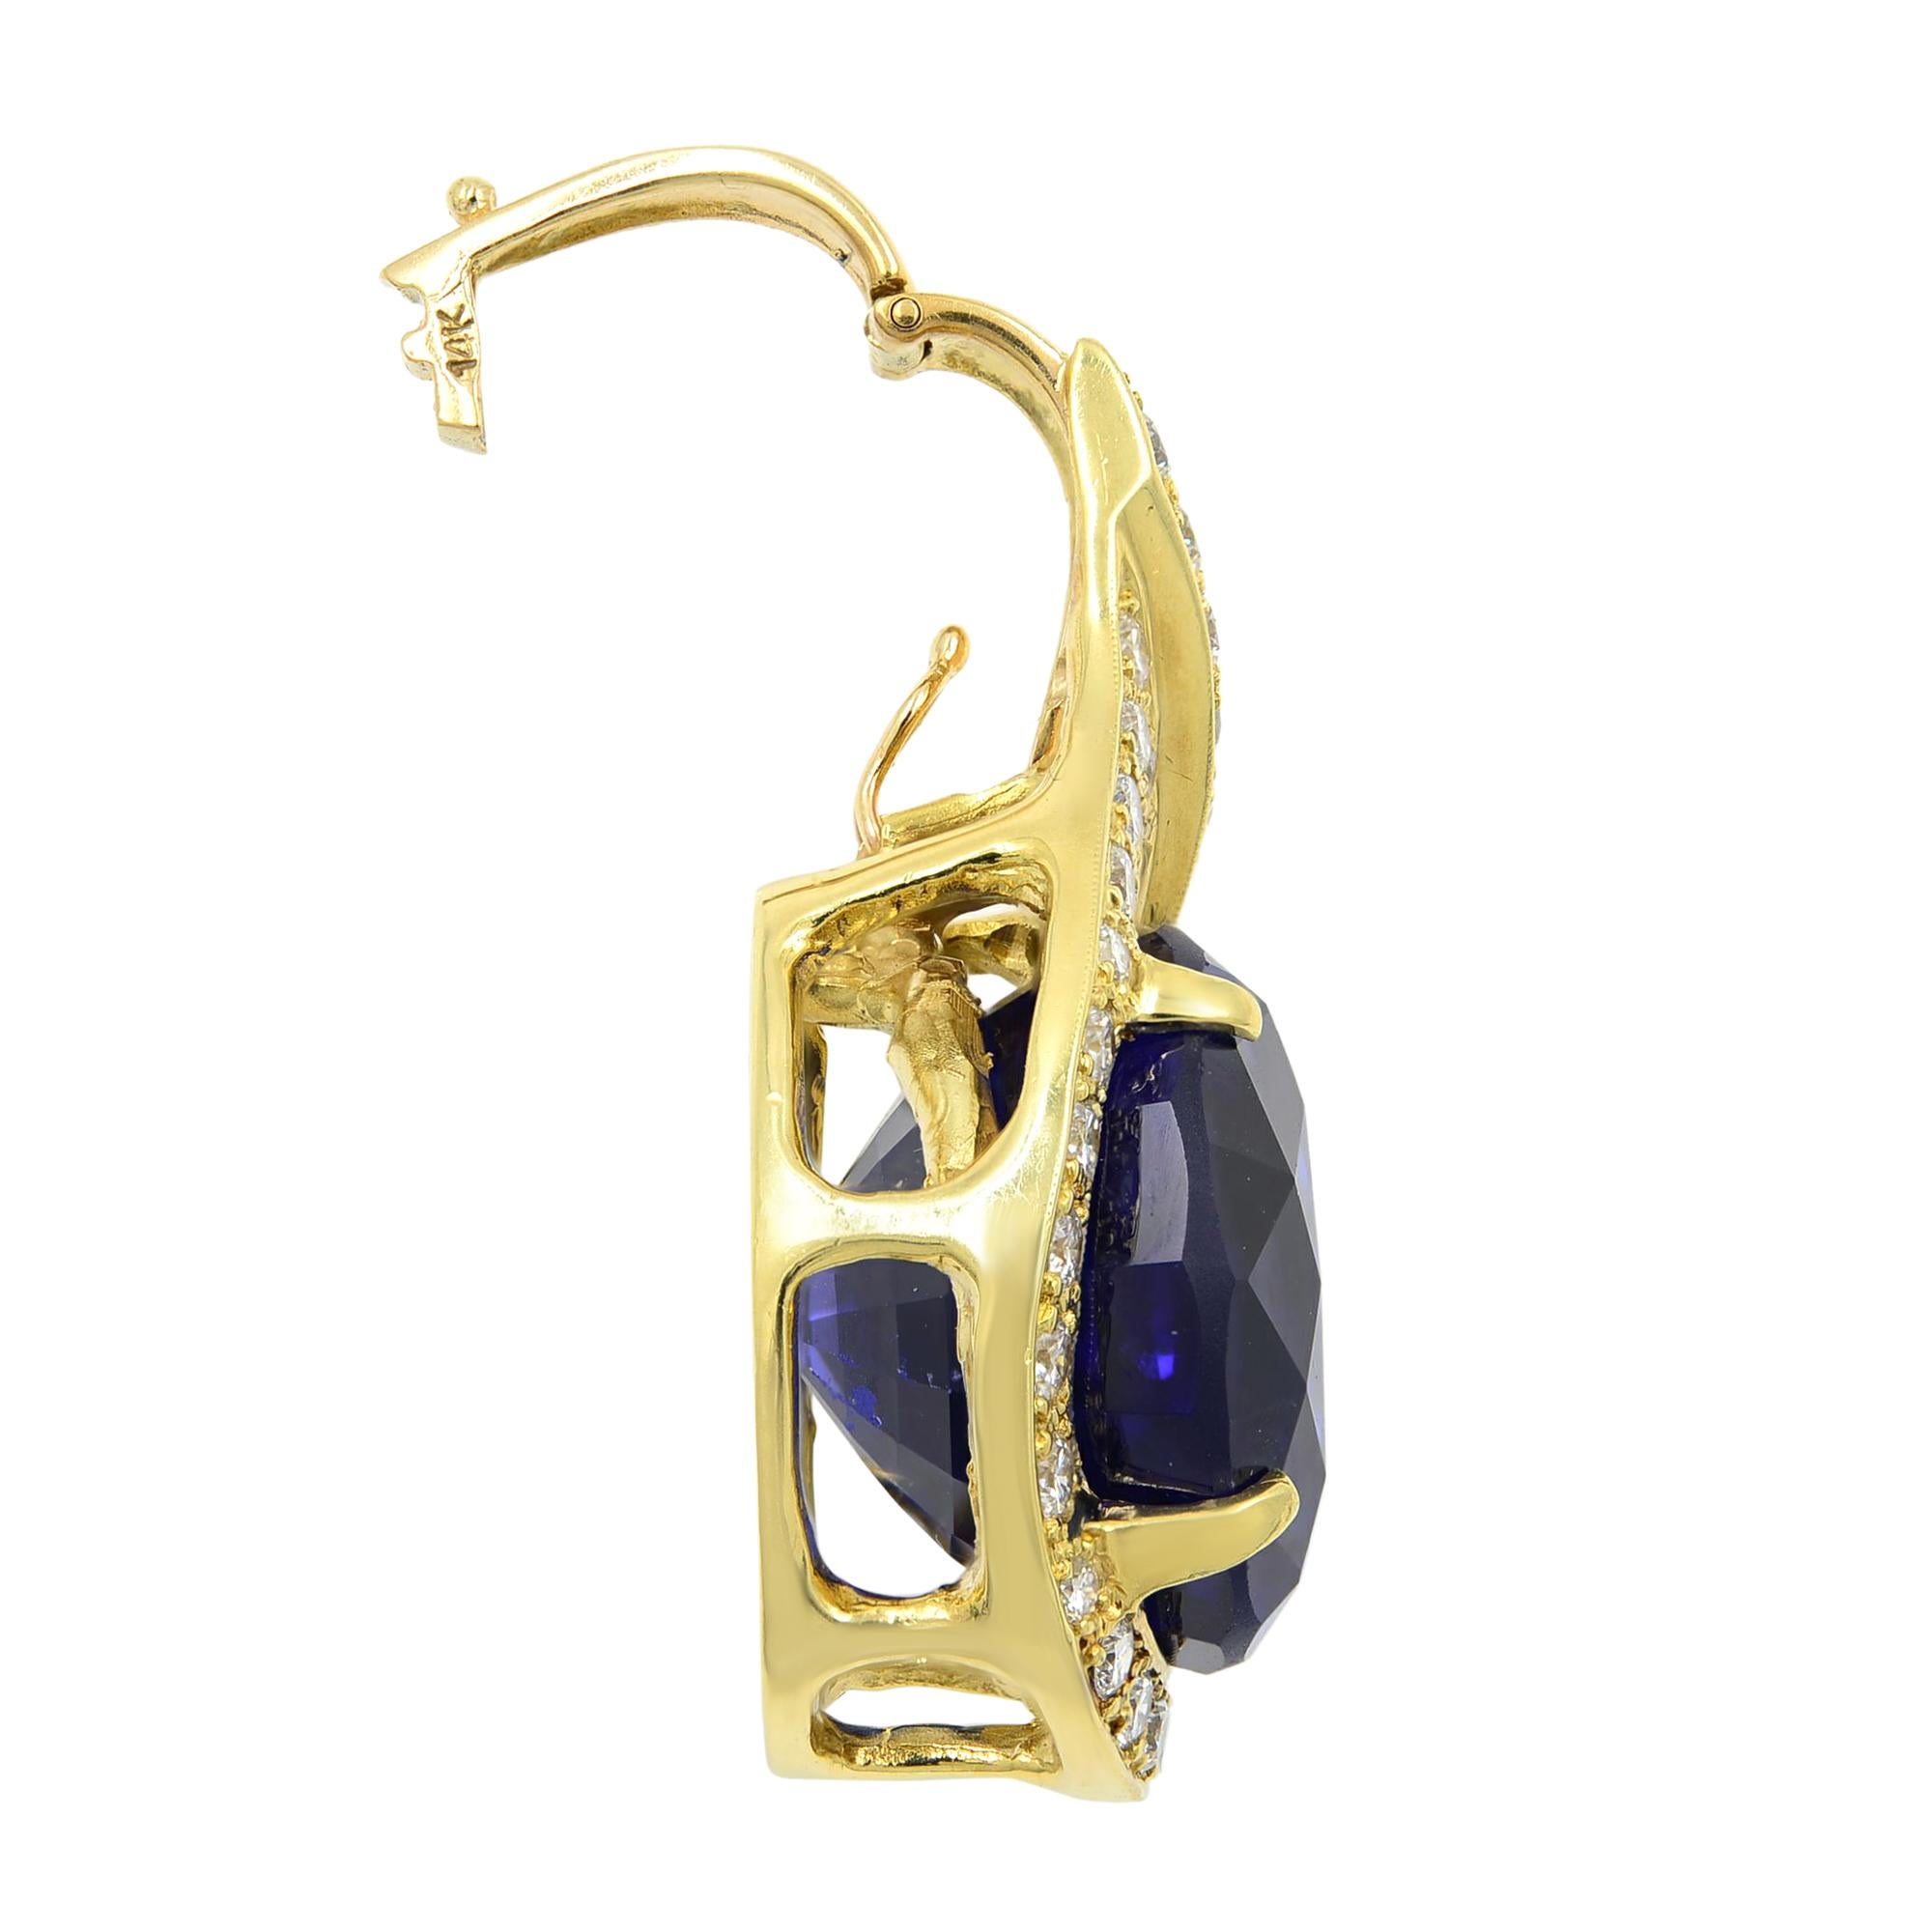 Rachel Koen Oval Tanzanite 27.66ct Diamond 1.75ct Pendant 14K Yellow Gold In Excellent Condition For Sale In New York, NY